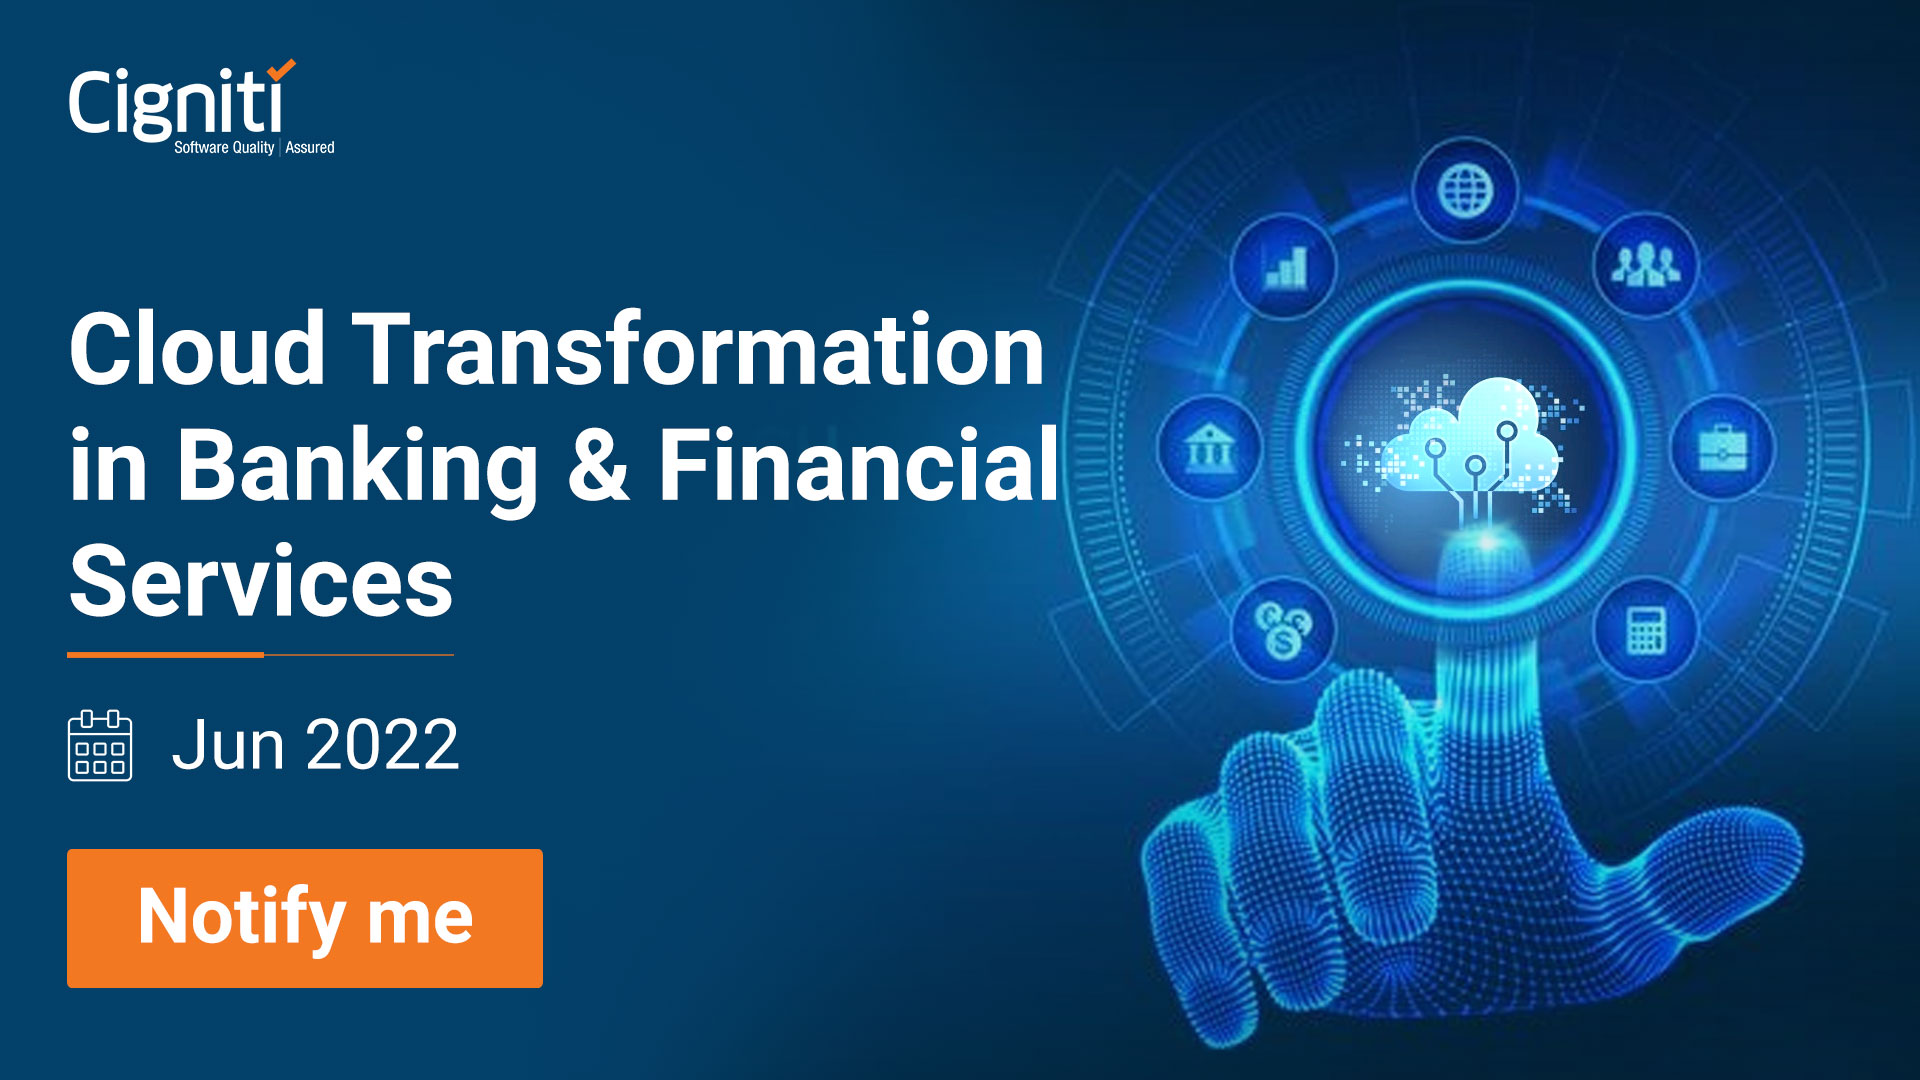 Cloud Transformation in Banking & Financial Services